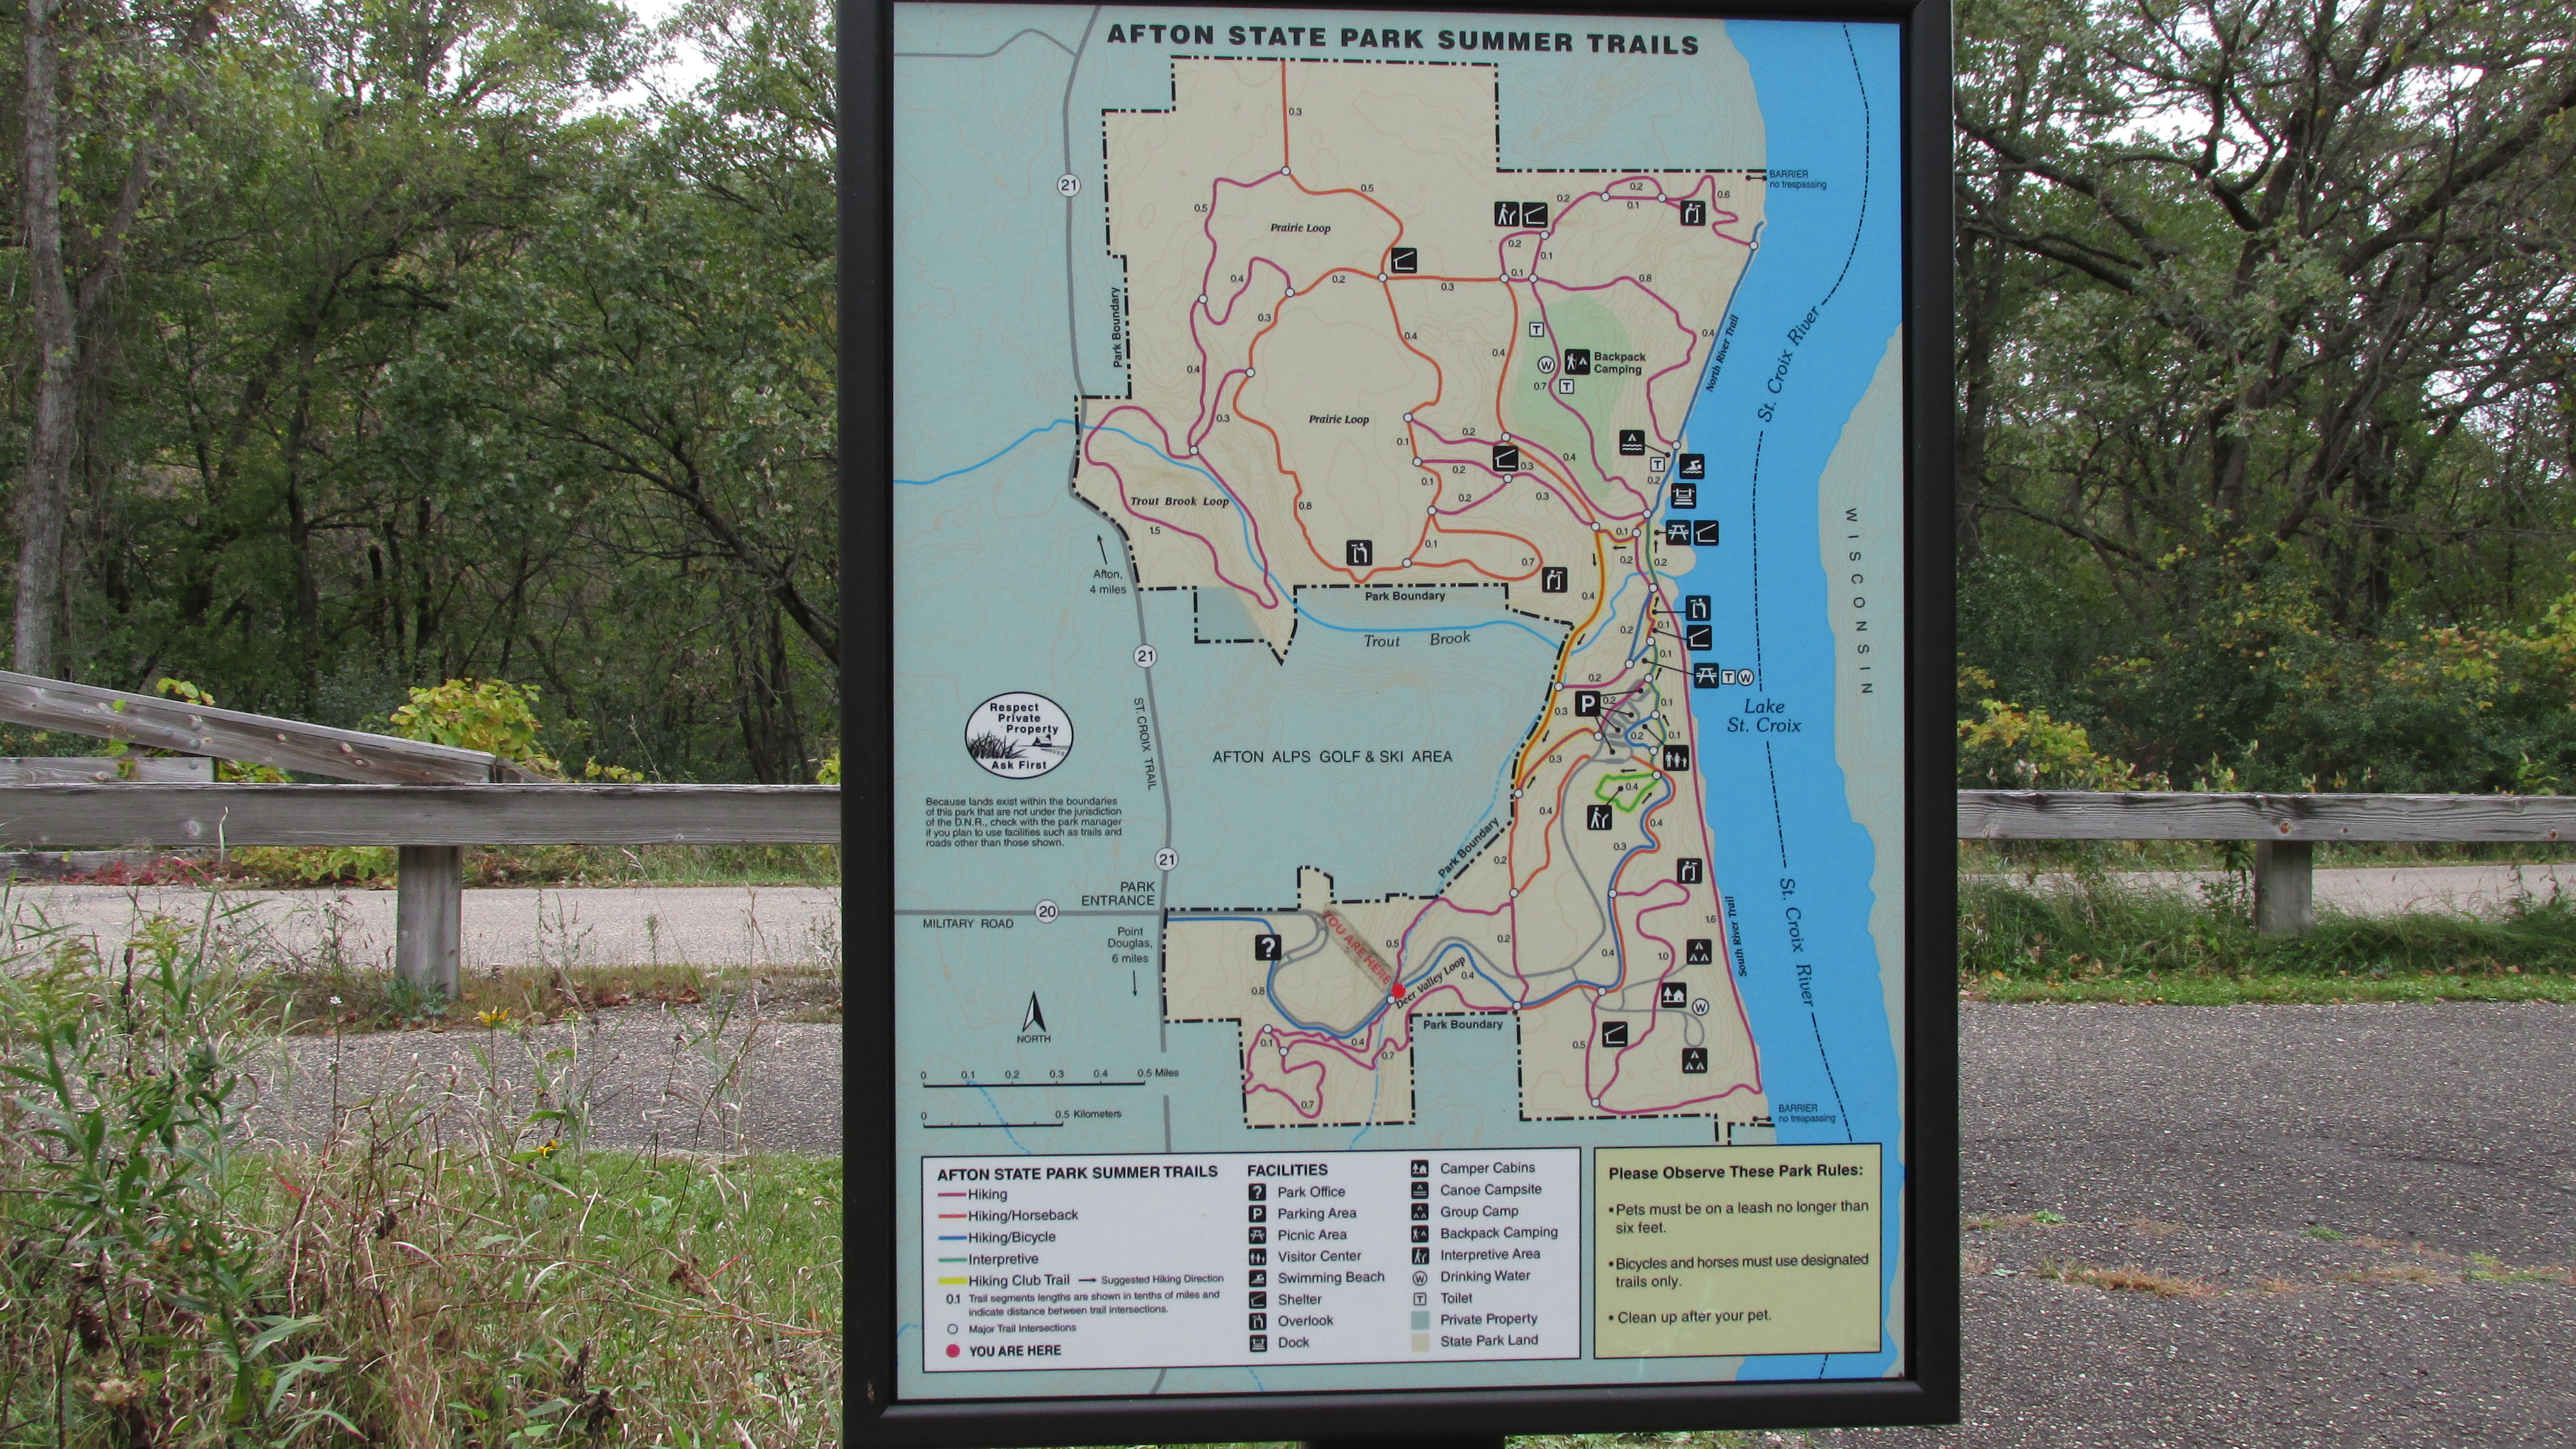 Trail map of Afton State Park